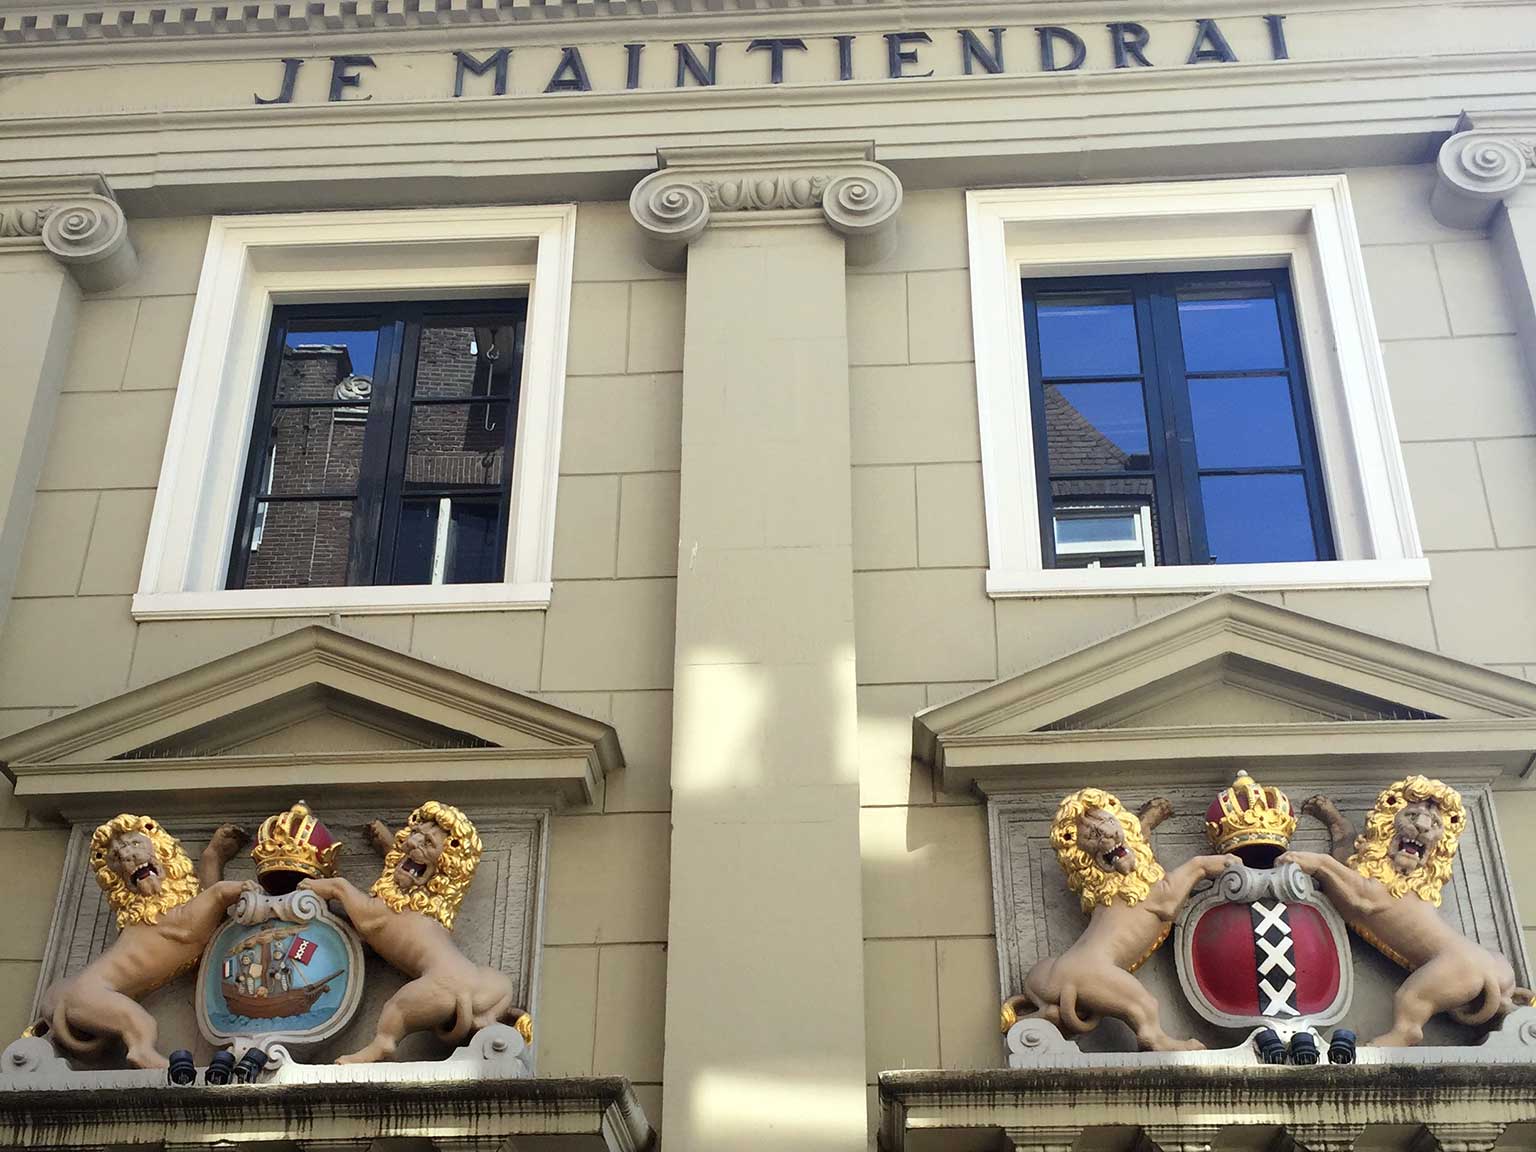 Lions and Amsterdam seals above entrances of the Accijnshuis, Amsterdam